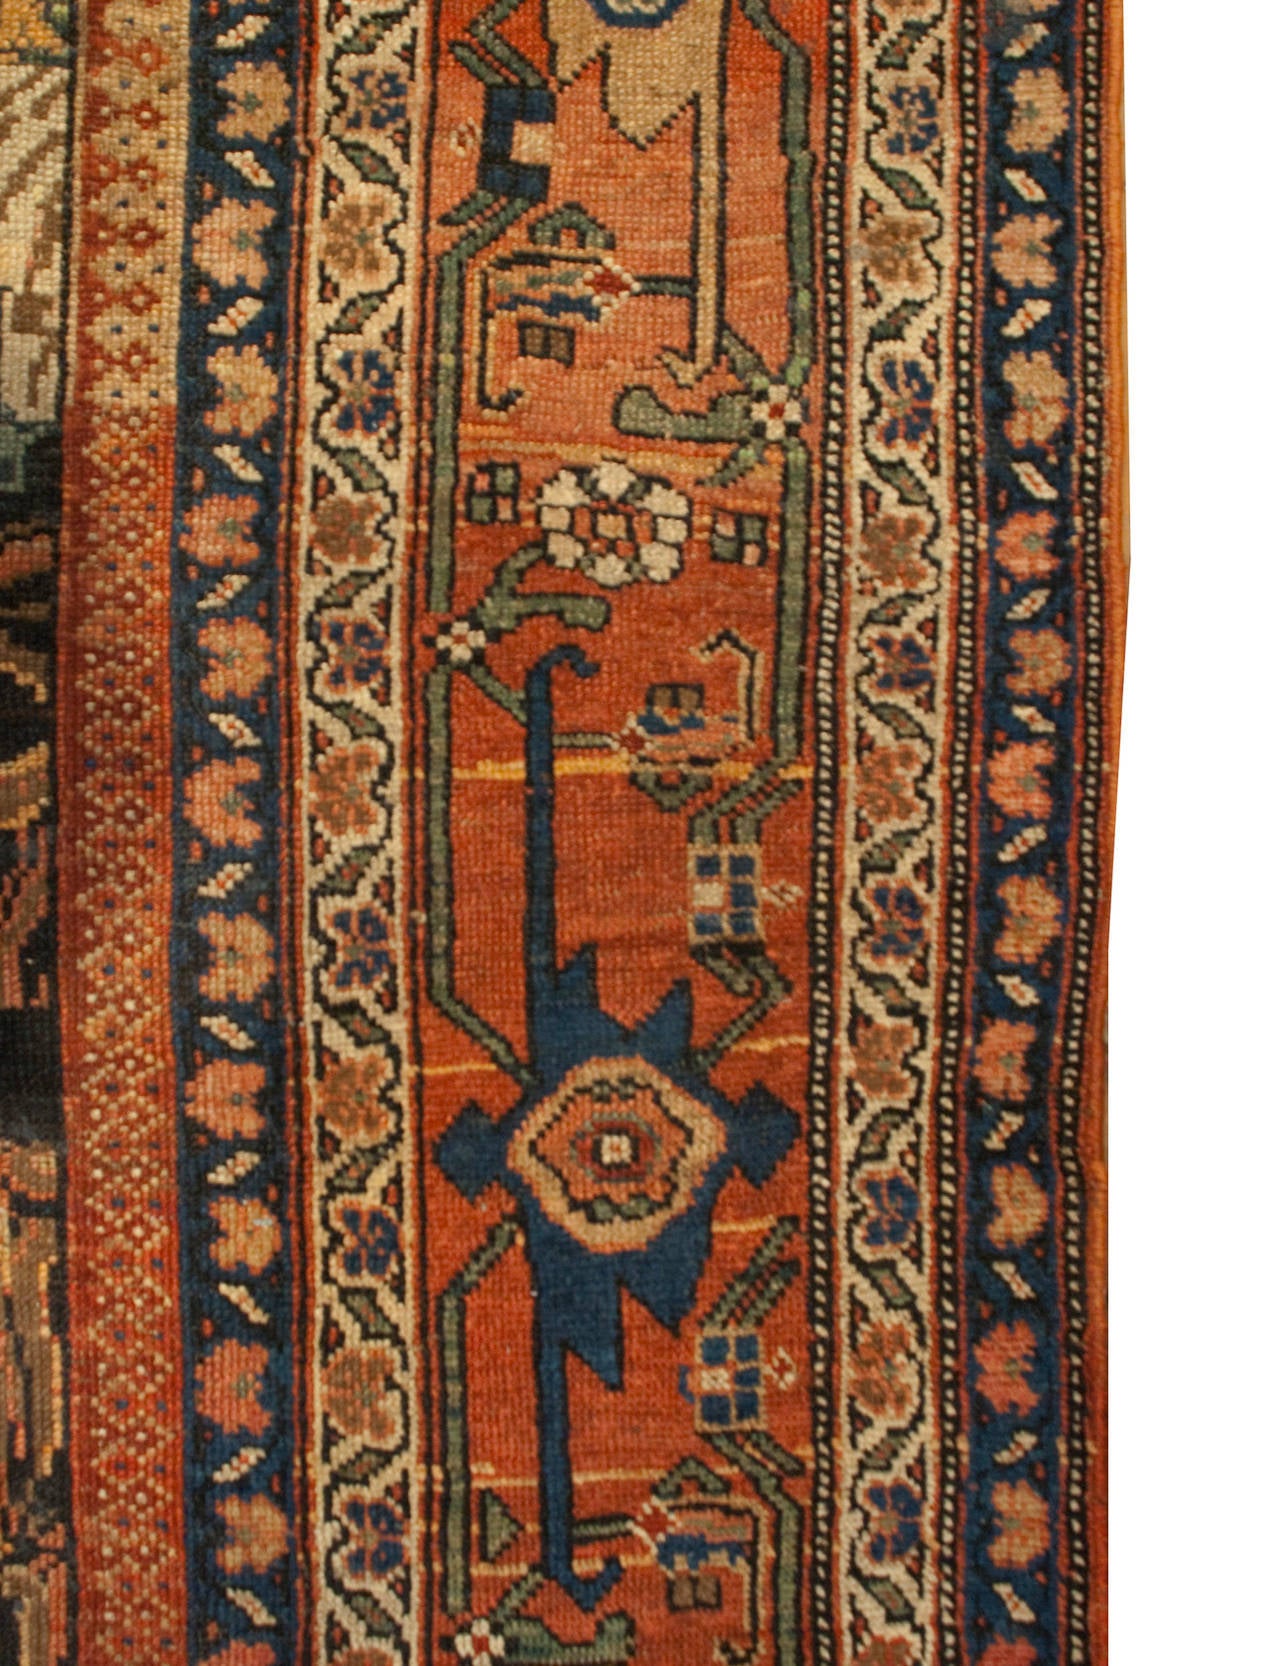 A wonderful 19th century Persian Karabagh runner with a beautifully woven floral central field, surrounded by multiple complementary floral borders.